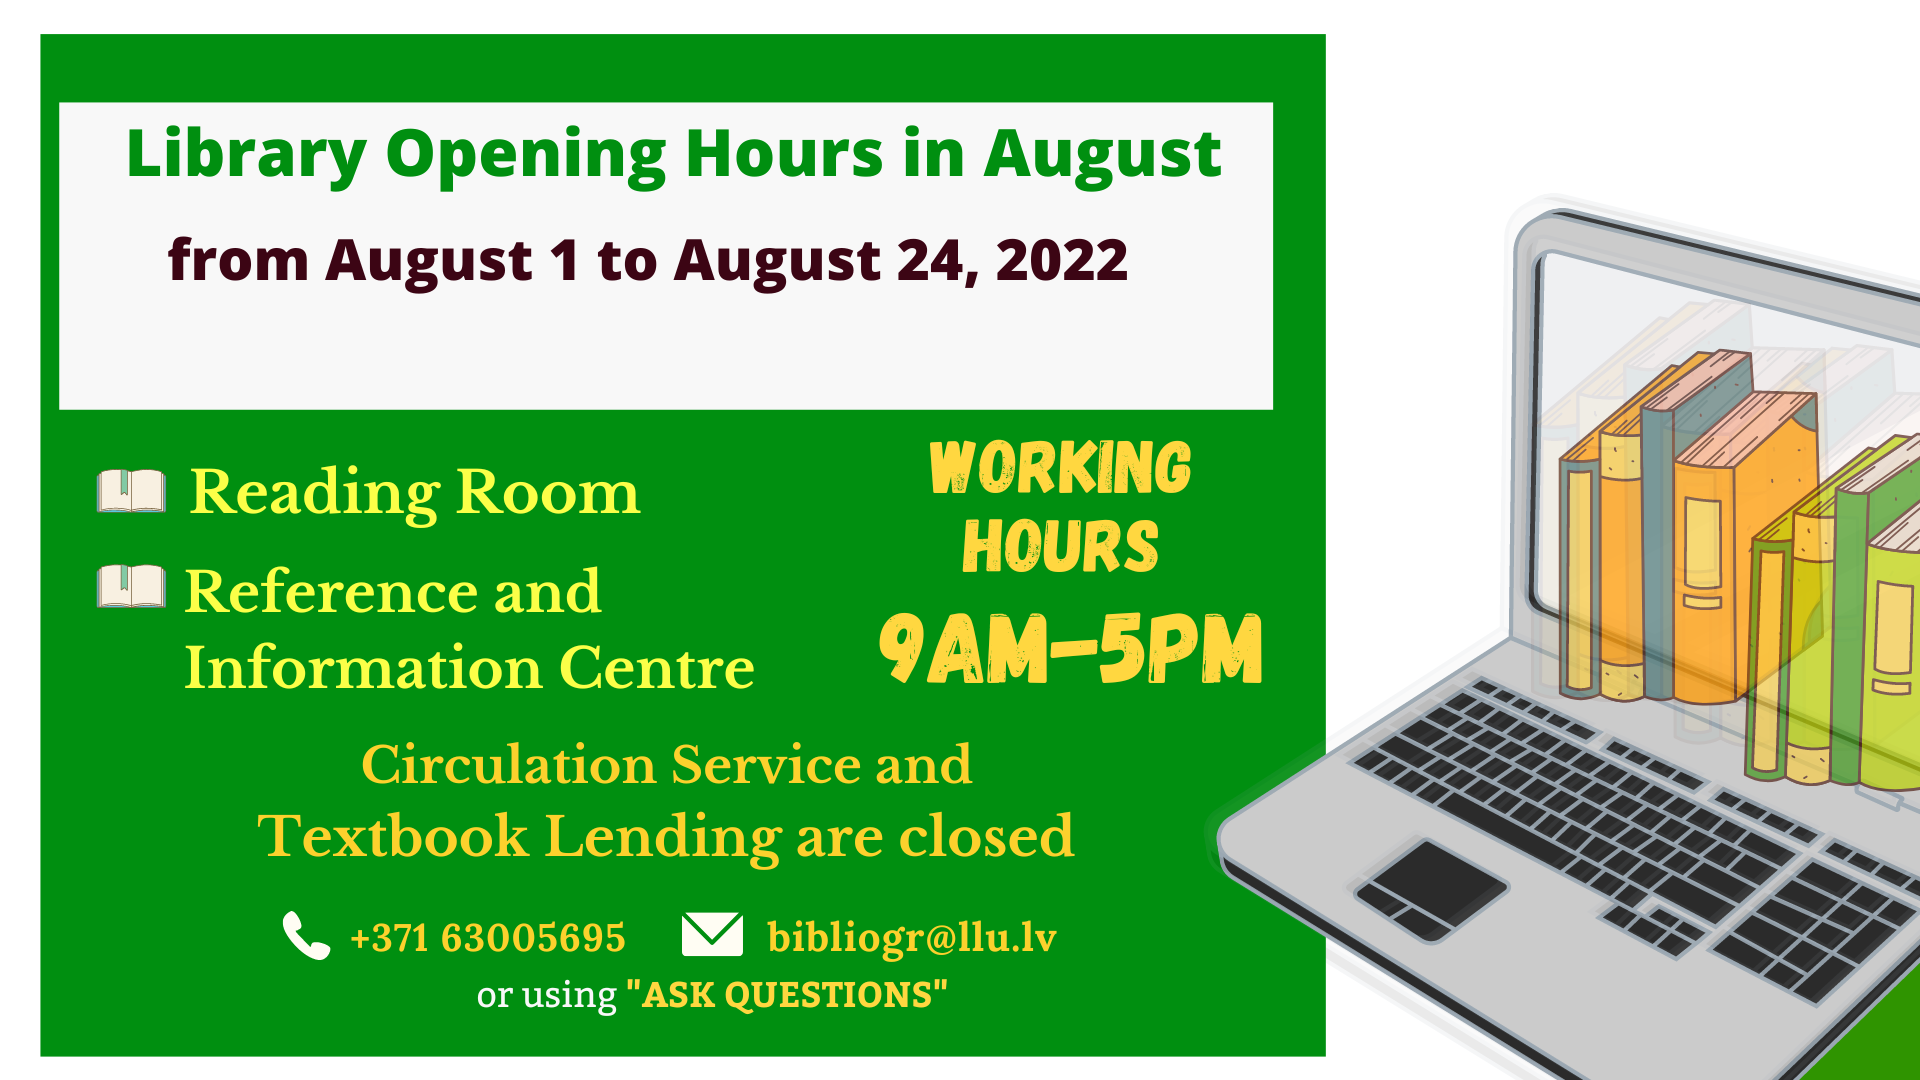 During the student holidays from August 1 to August 24, the library is open for readers until 17.00. Circulation Service and  Textbook Lending are closed.